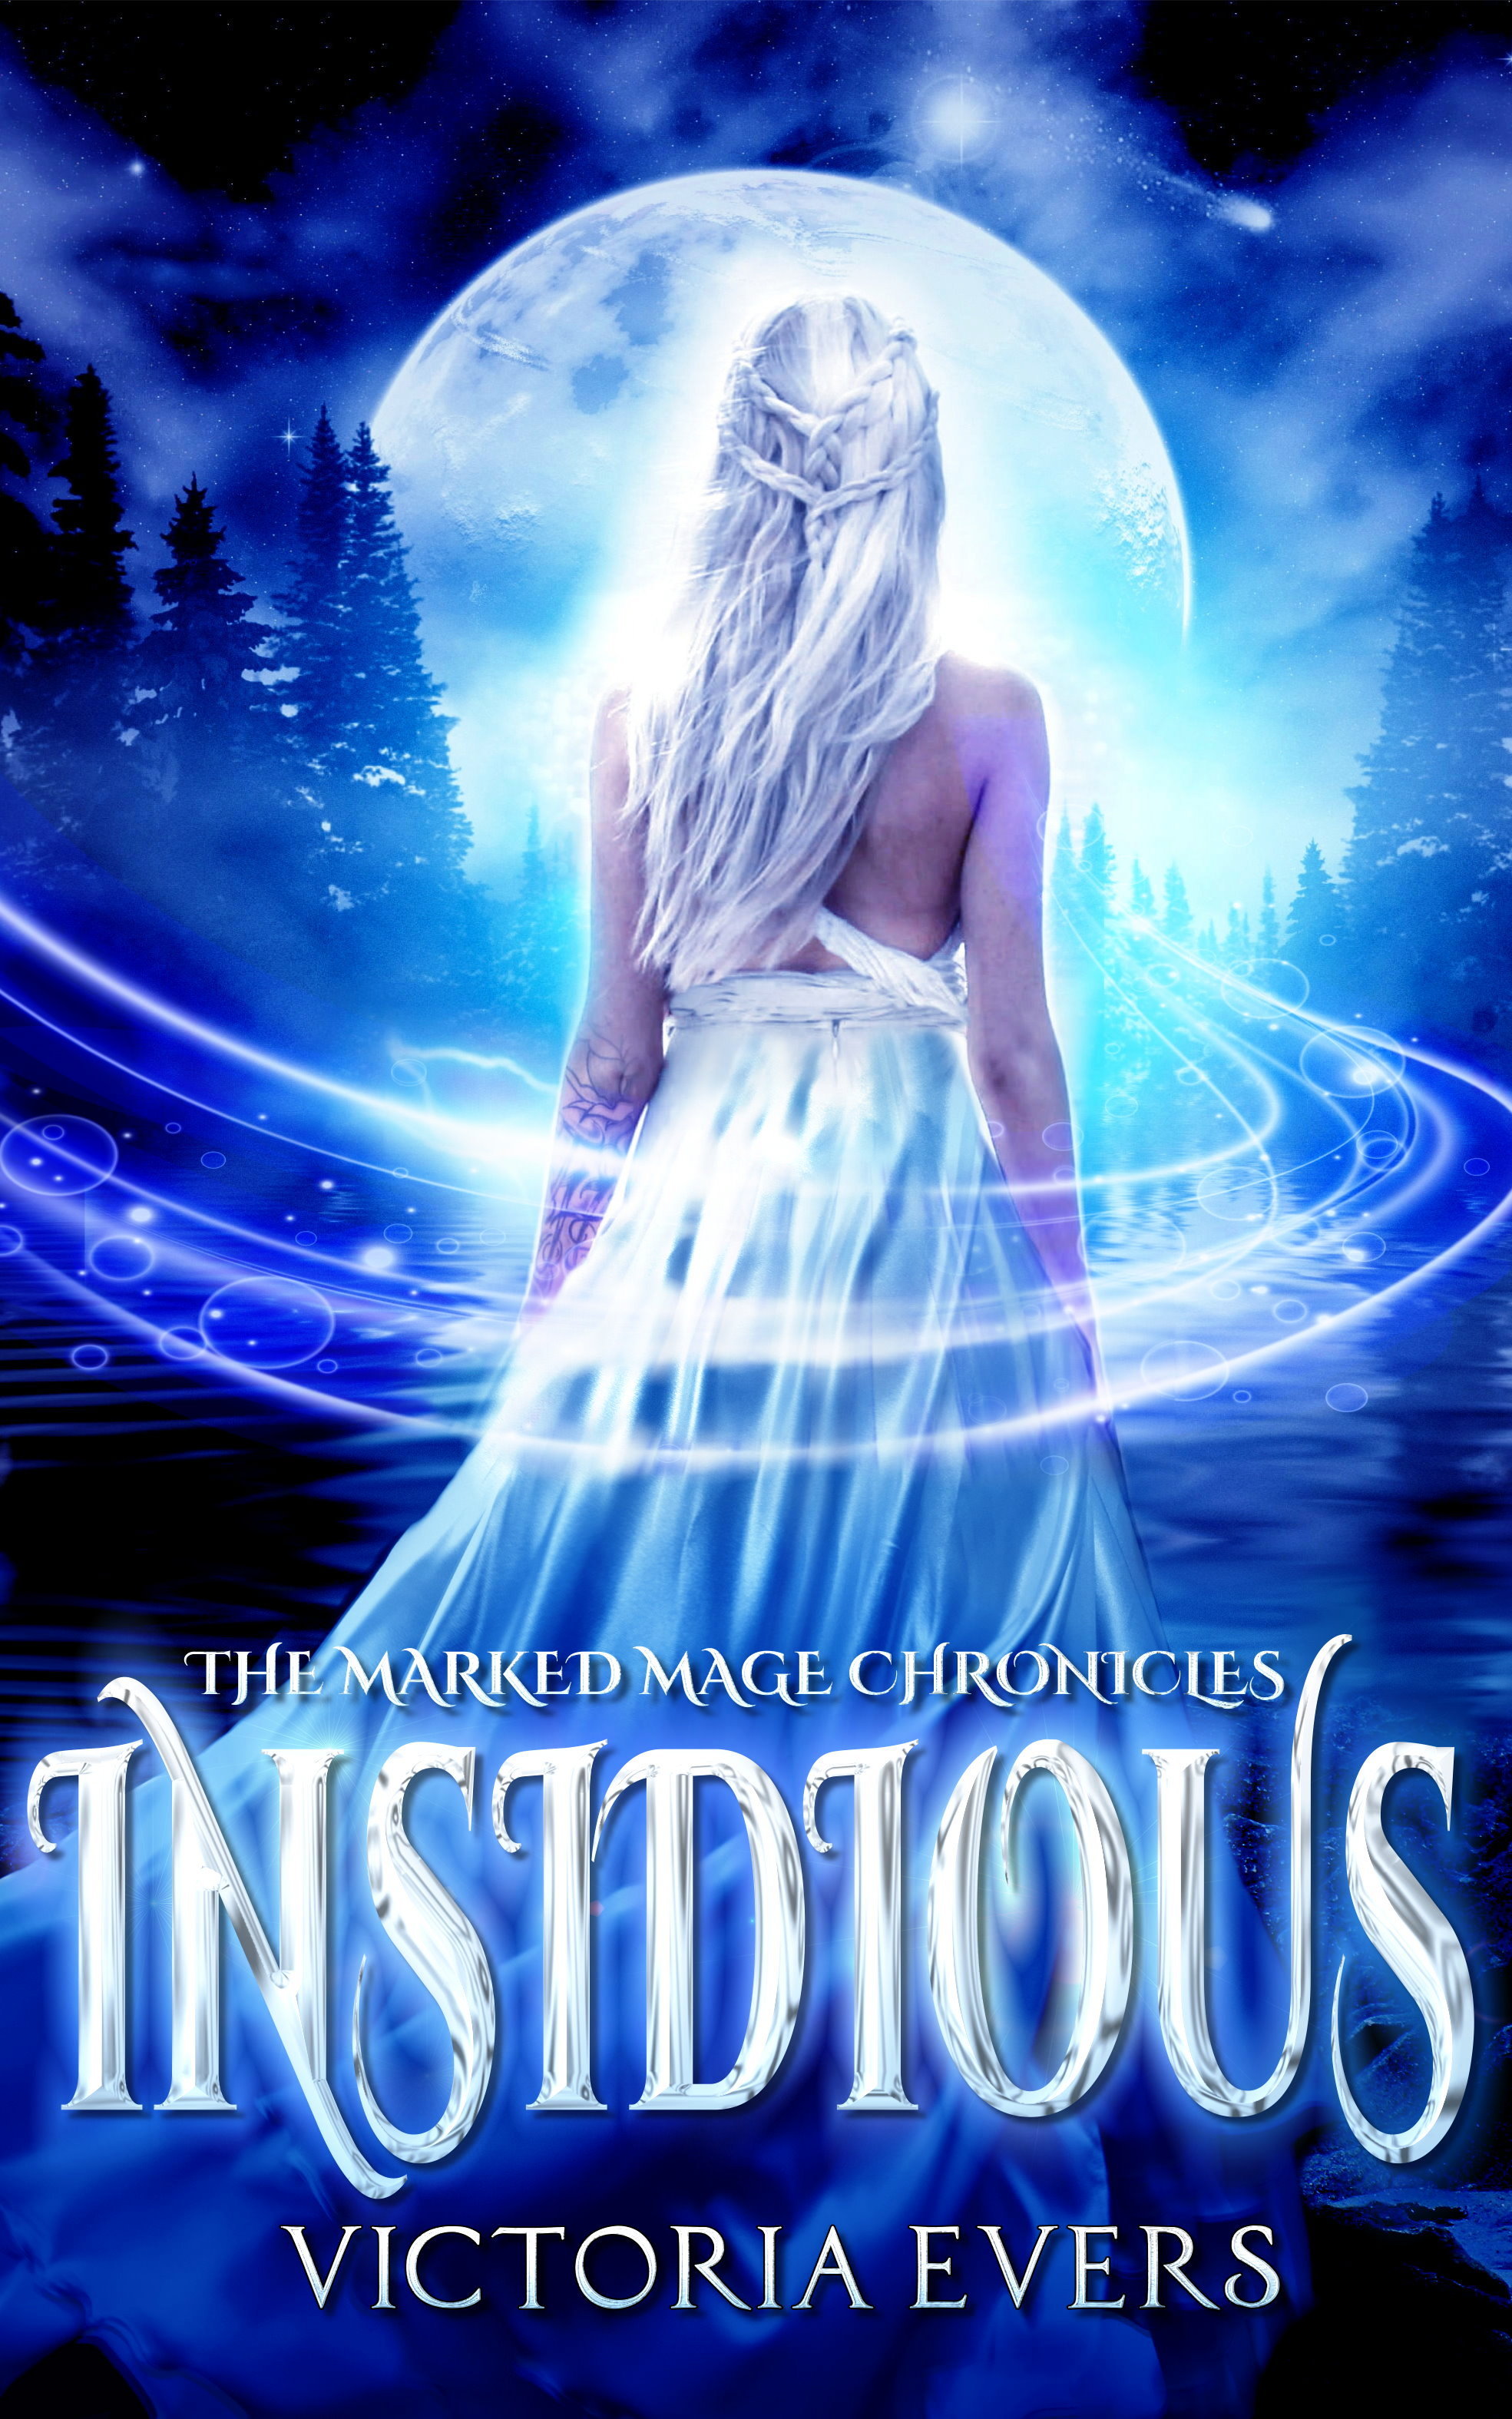 FREE: Insidious: An Urban Fantasy Romance (The Marked Mage Chronicles, Book 1) by Victoria Evers